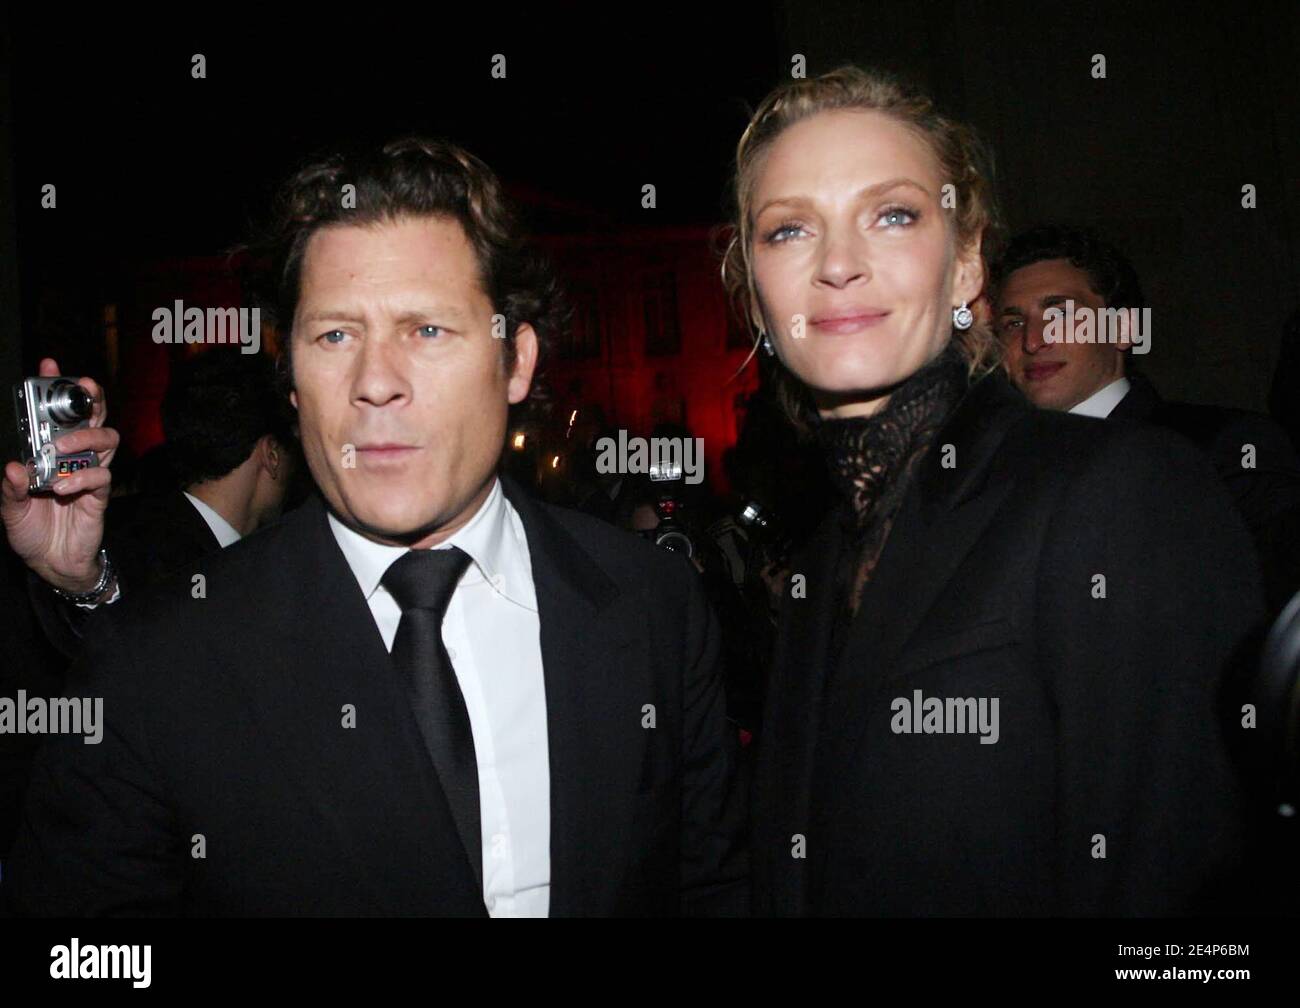 US actress Uma Thurman and boyfriend Arpad Busson attend Valentino's Spring-Summer 2008 Haute-Couture show held at the Musee Rodin in Paris, France, on January 23, 2008. 75-year-old Valentino retires after 45 years in the business. Photo by ABACAPRESS.COM Stock Photo